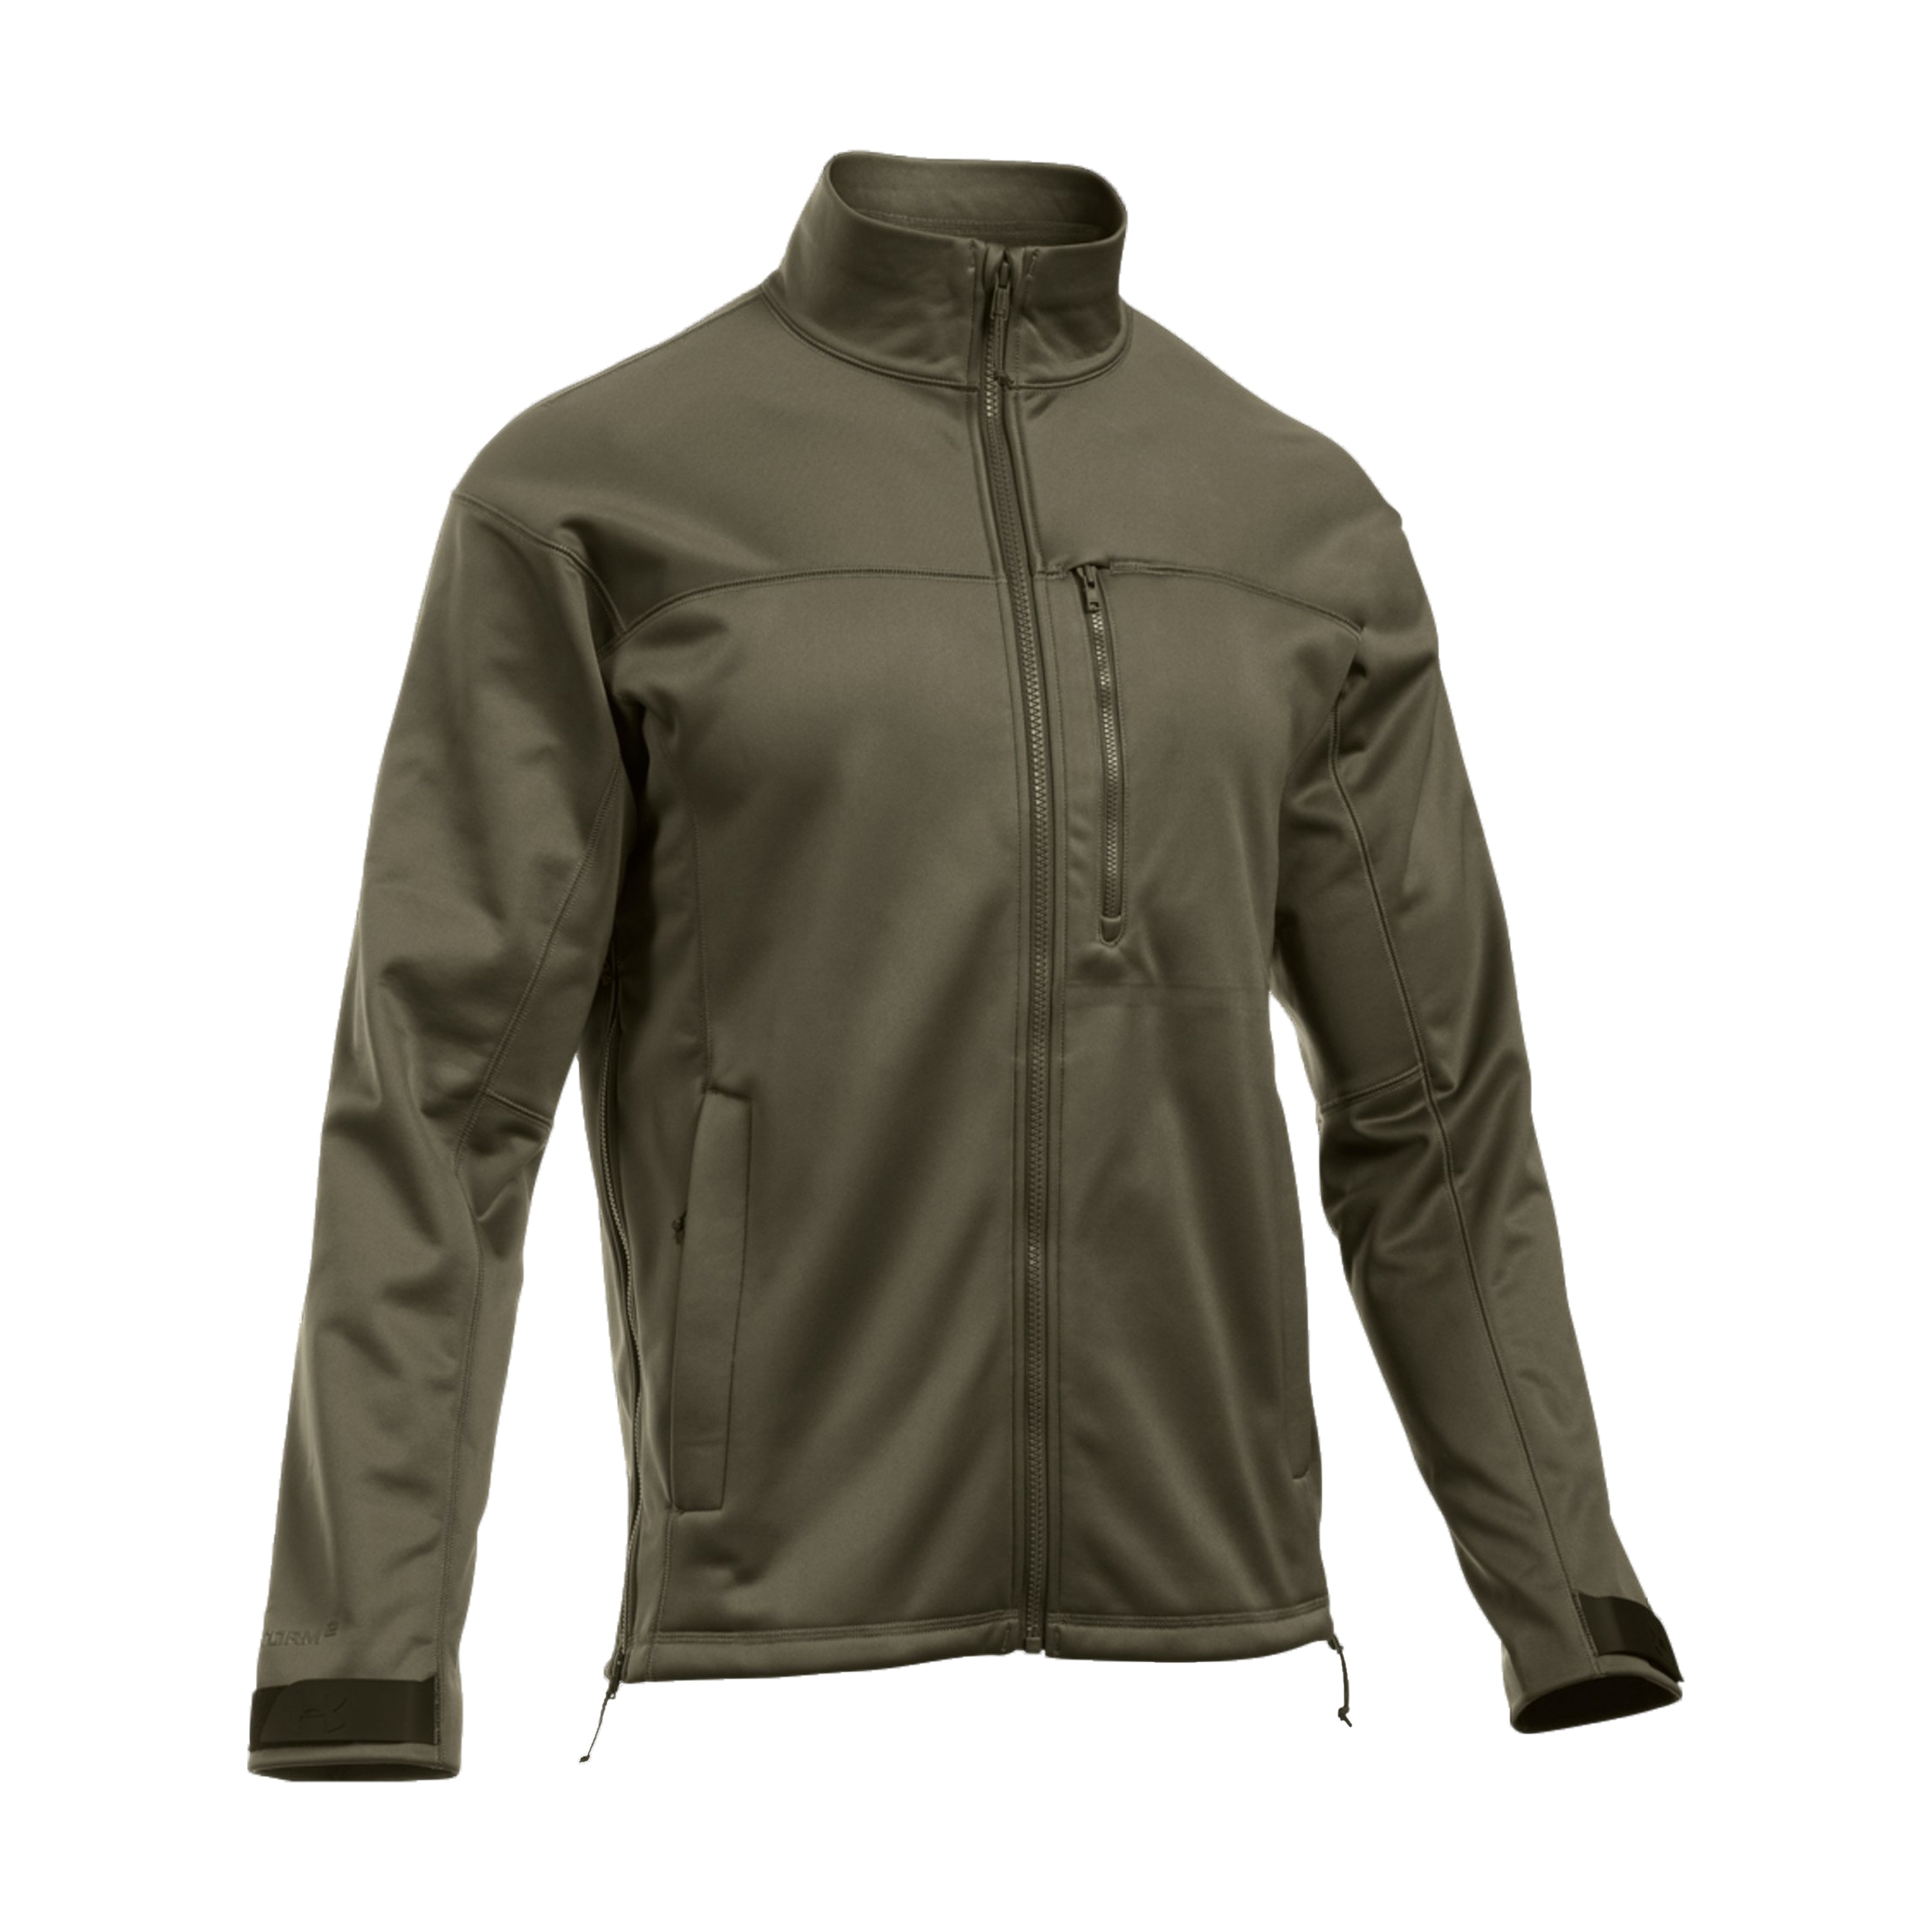 Under Armour Tactical Jacket Duty olive